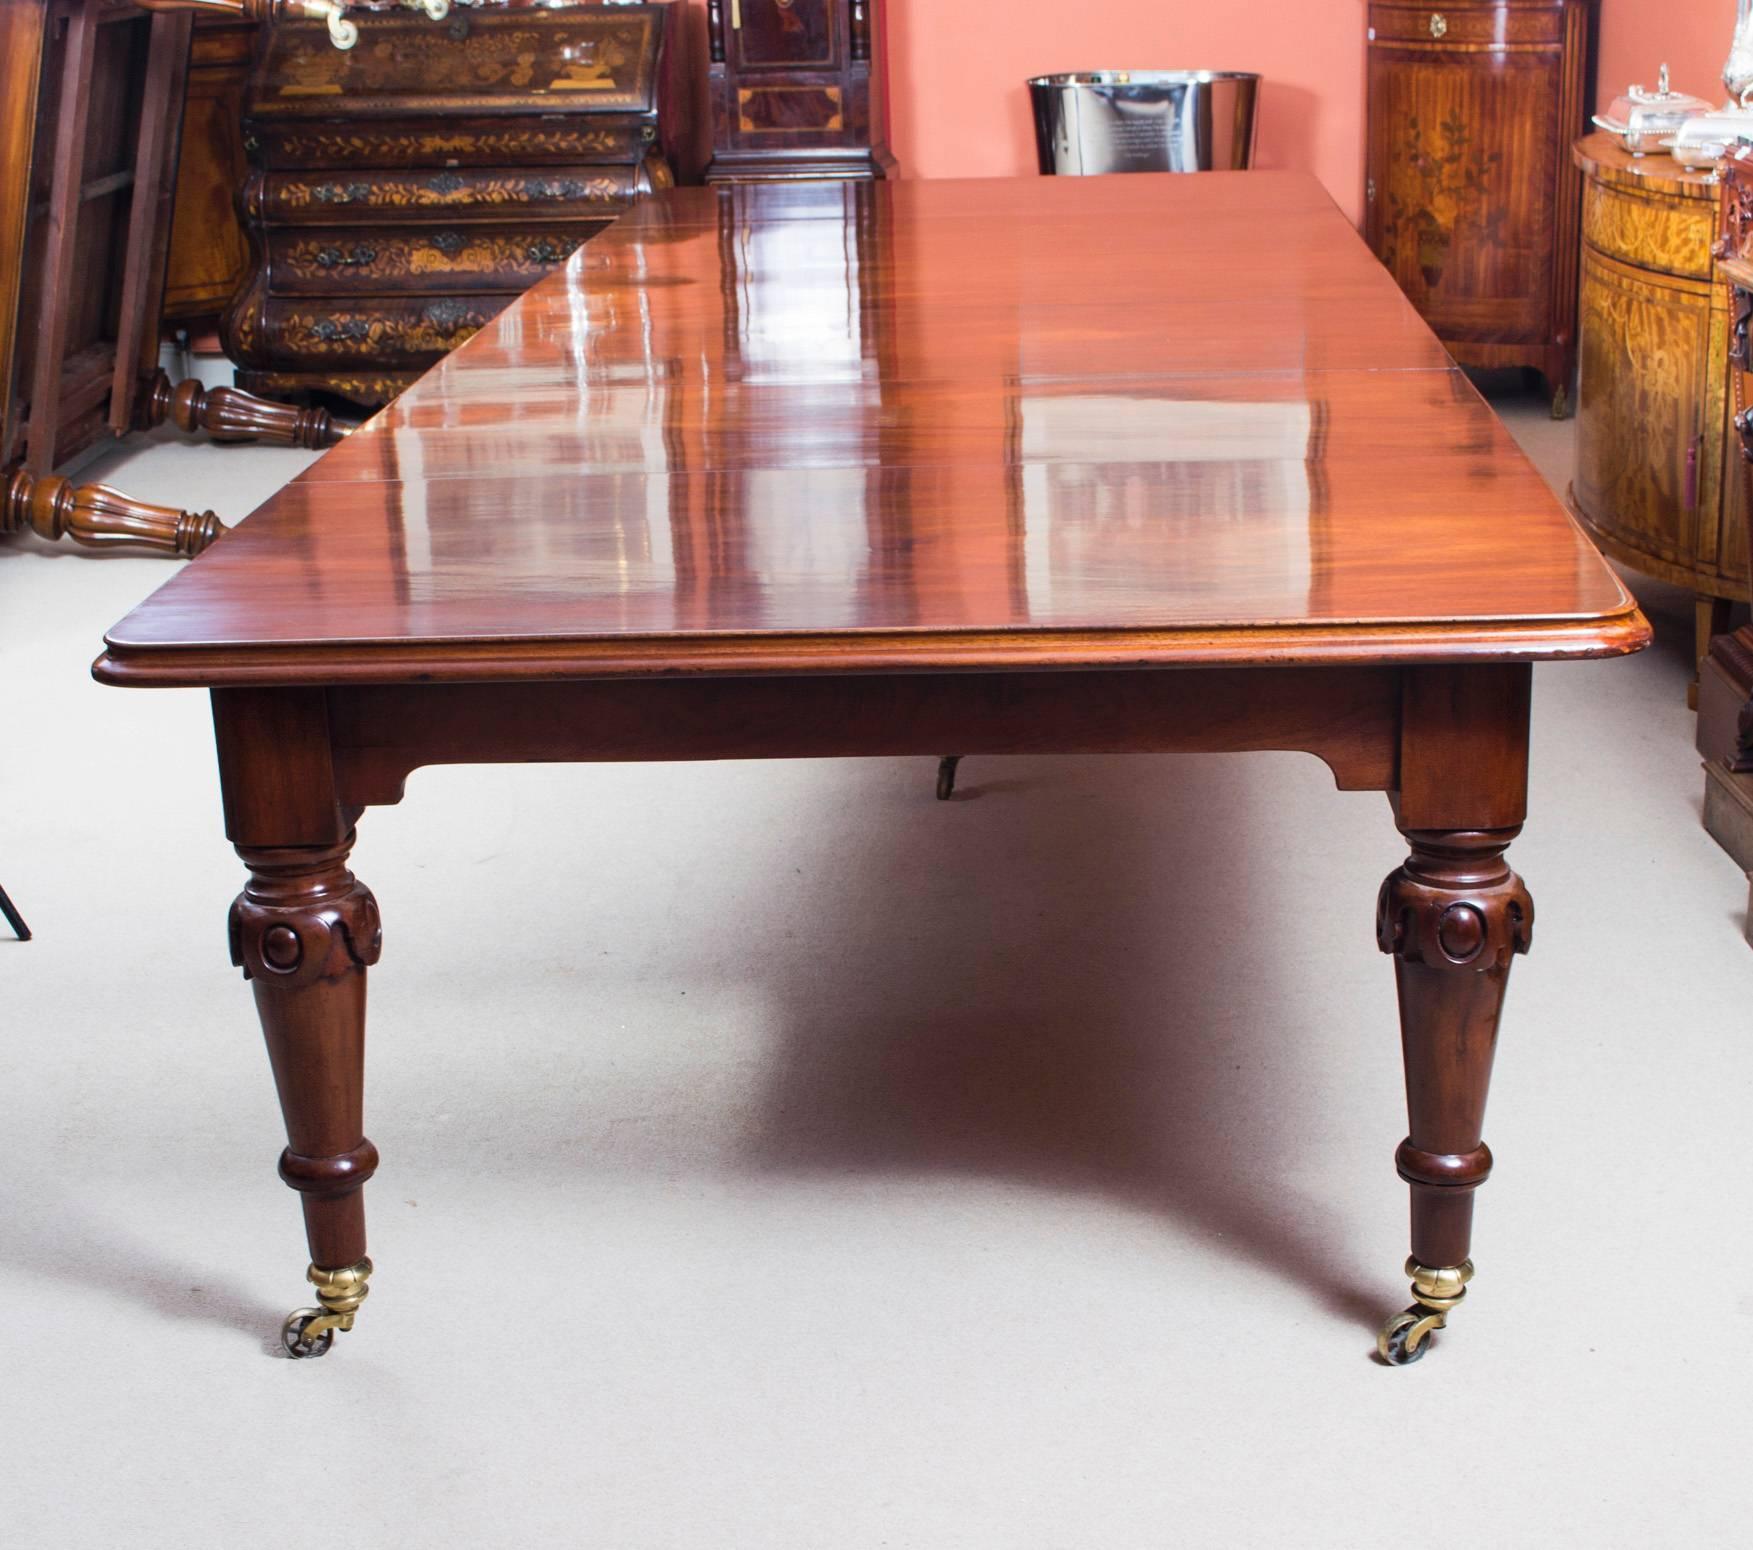 This is a rare opportunity to own an antique mid Victorian, flame mahogany dining or conference table, circa 1850 in date, which can seat 14 people in comfort.

It has four original leaves and the original leaf holder and these leaves can be added